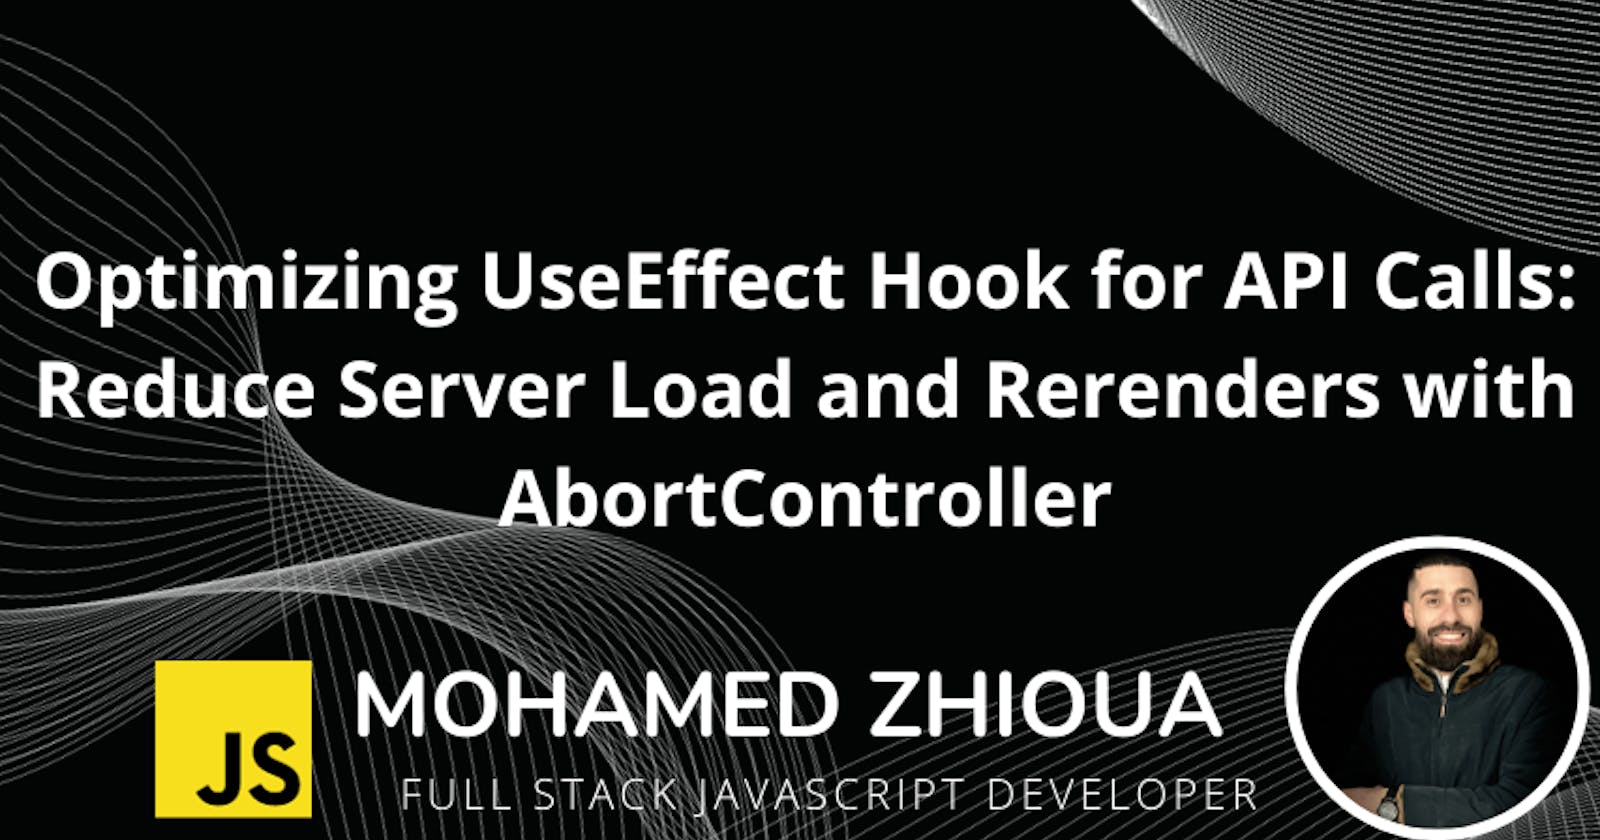 Optimizing UseEffect Hook for API Calls: Reduce Server Load and Rerenders with AbortController